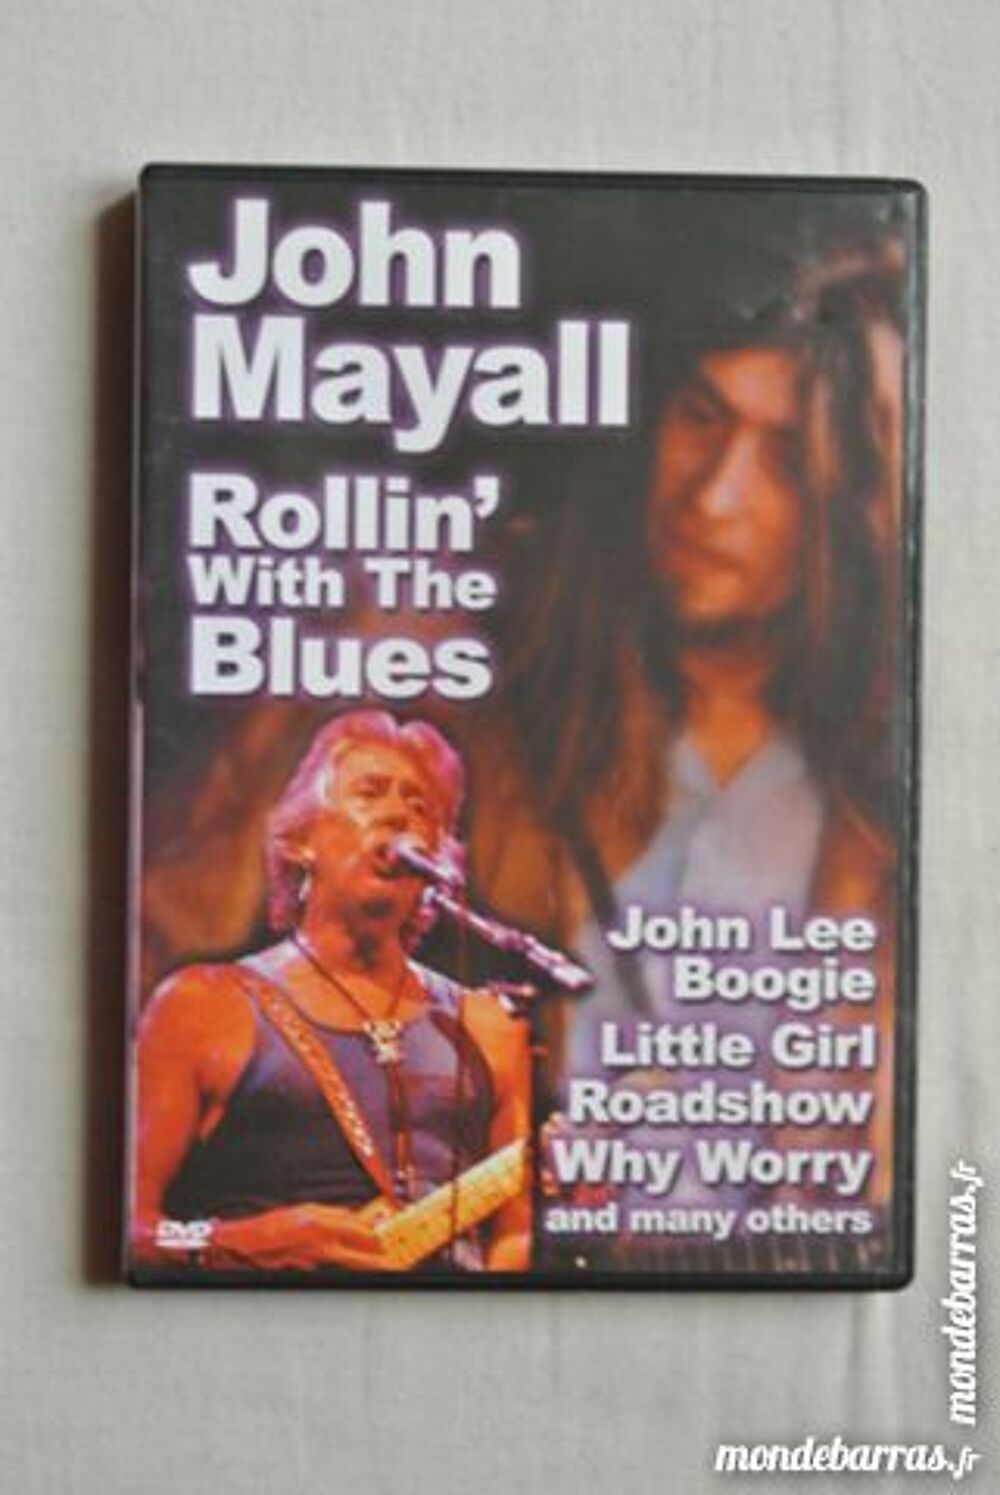 &quot;John Mayall &quot;&quot;Rollin with the blues&quot;&quot;&quot; DVD et blu-ray